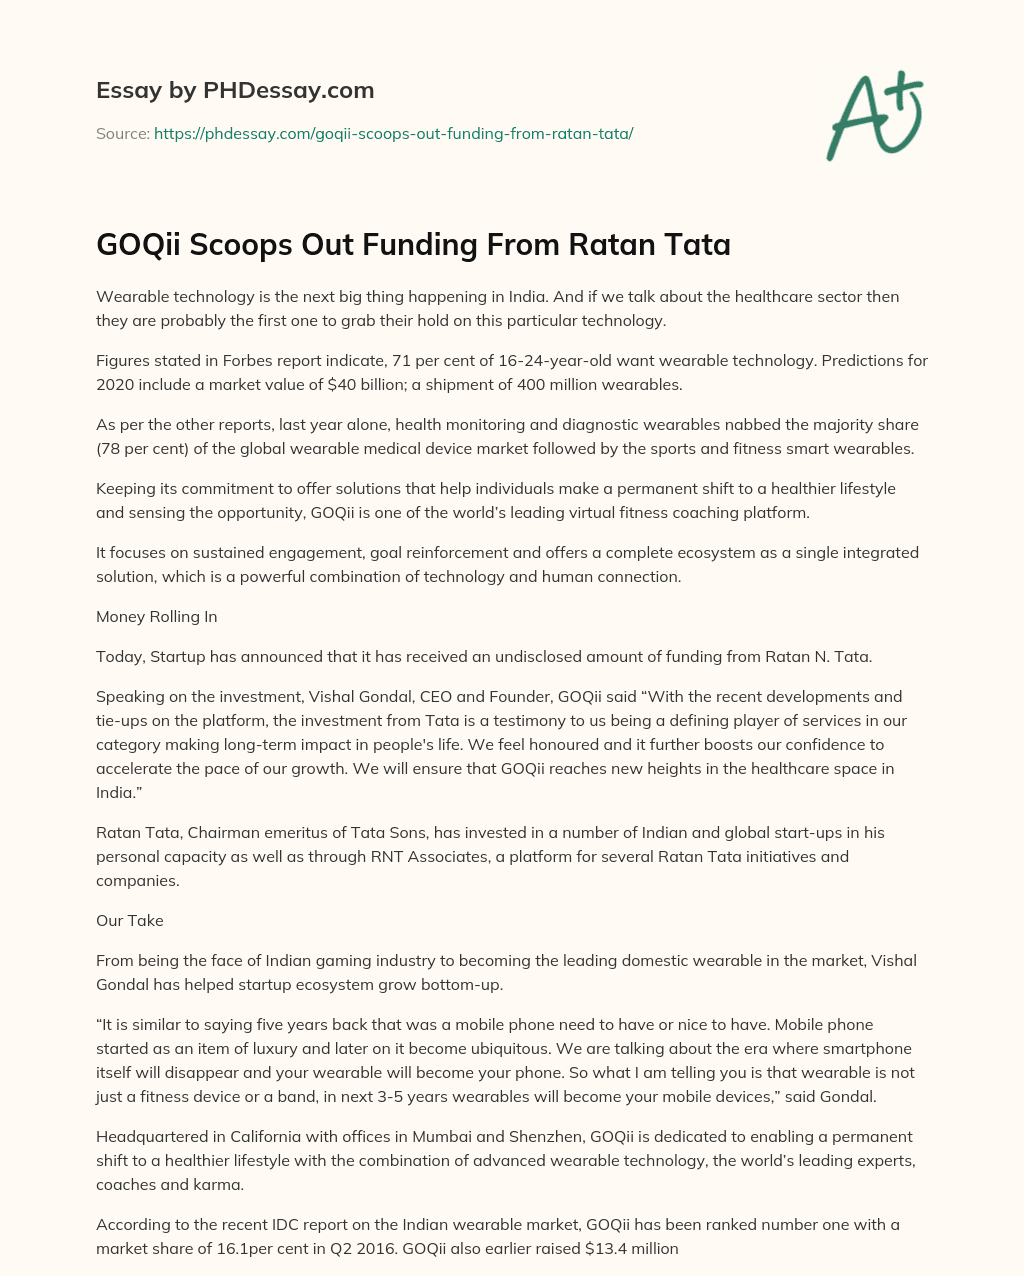 GOQii Scoops Out Funding From Ratan Tata essay